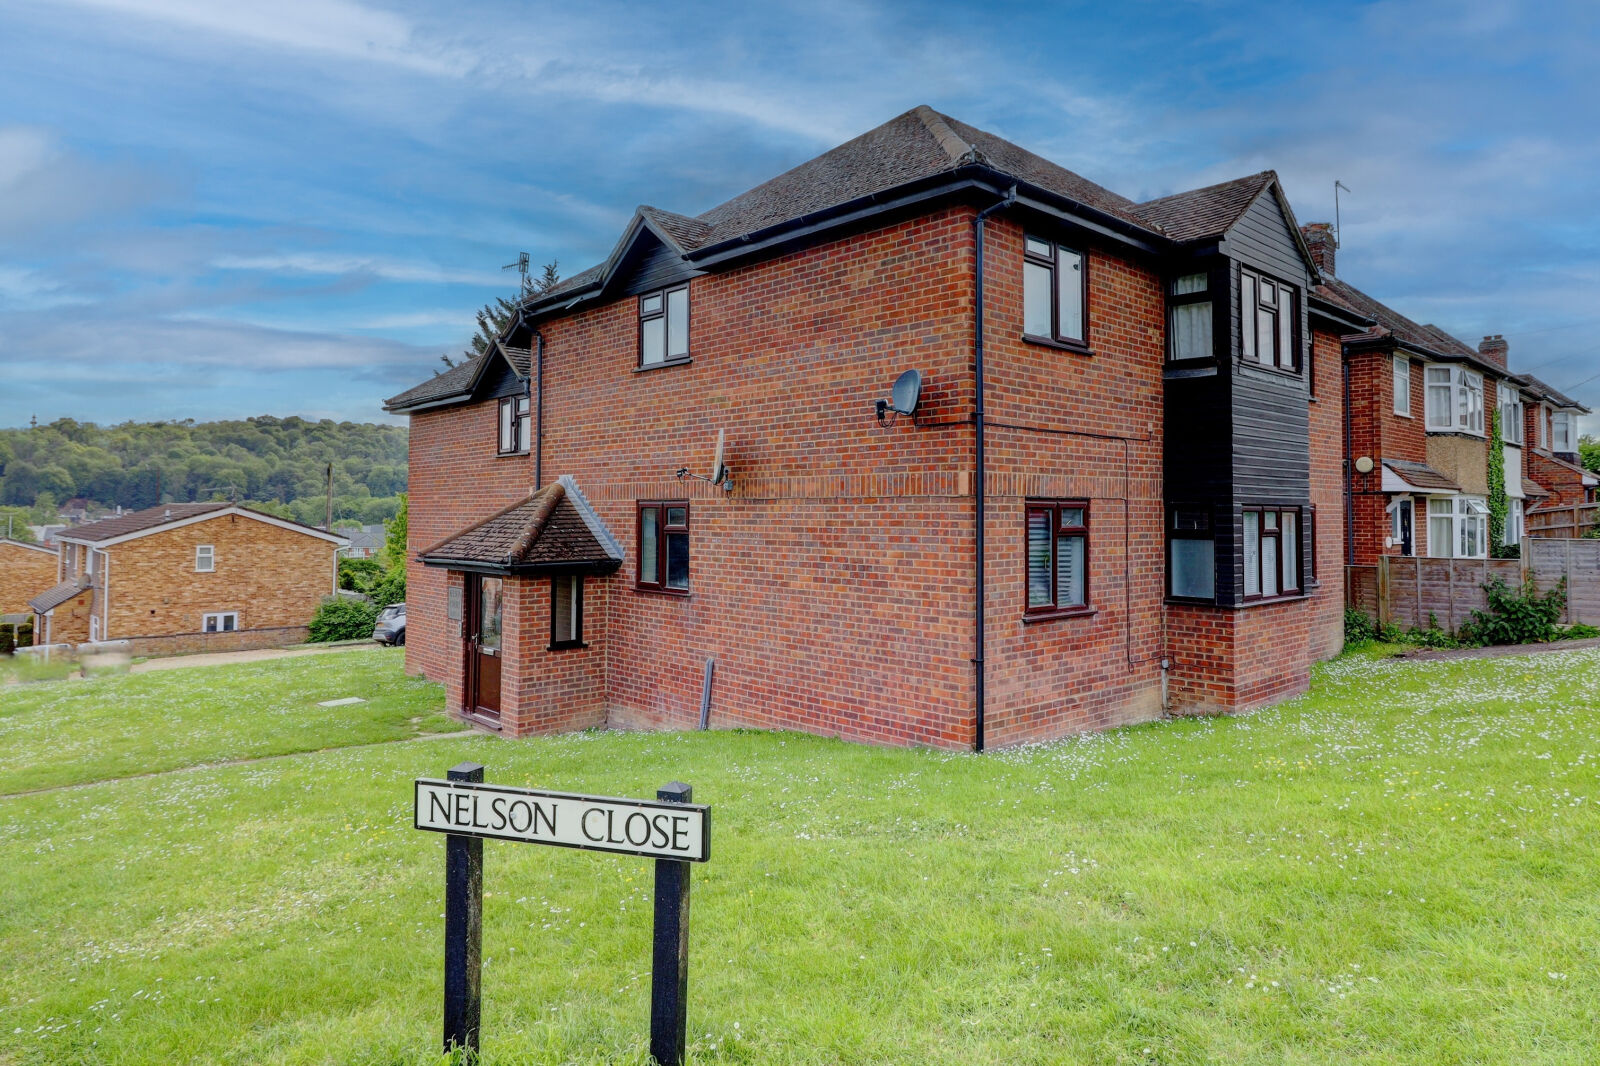 2 bedroom  flat for sale Nelson Court, High Wycombe, HP13, main image